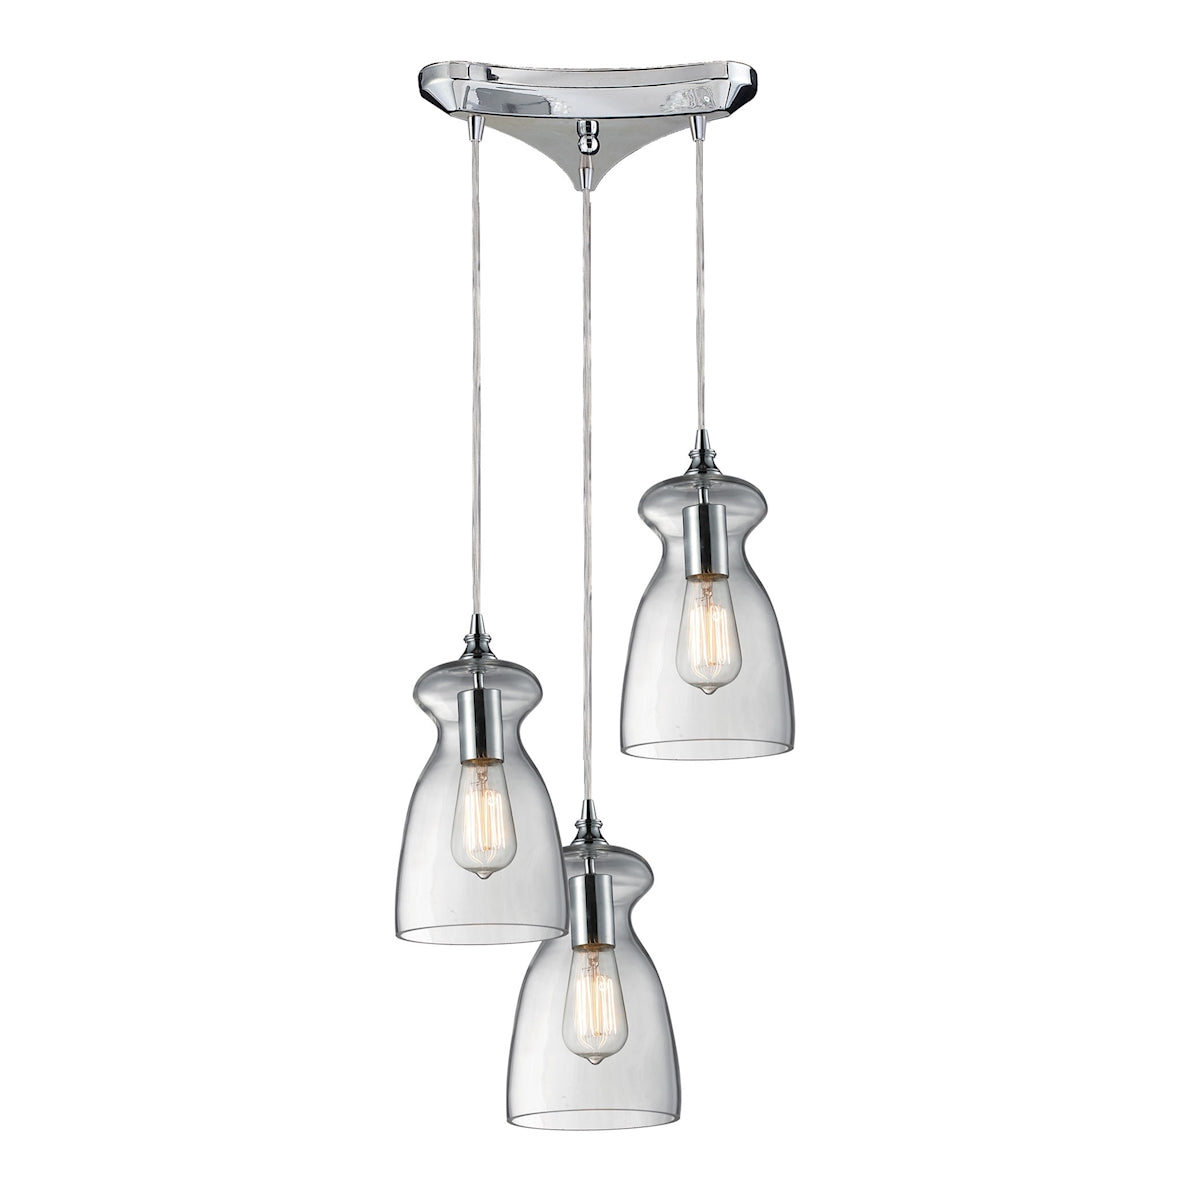 ELK Lighting 60053-3 Menlow Park 3-Light Triangular Pendant Fixture in Polished Chrome with Smoked Glass